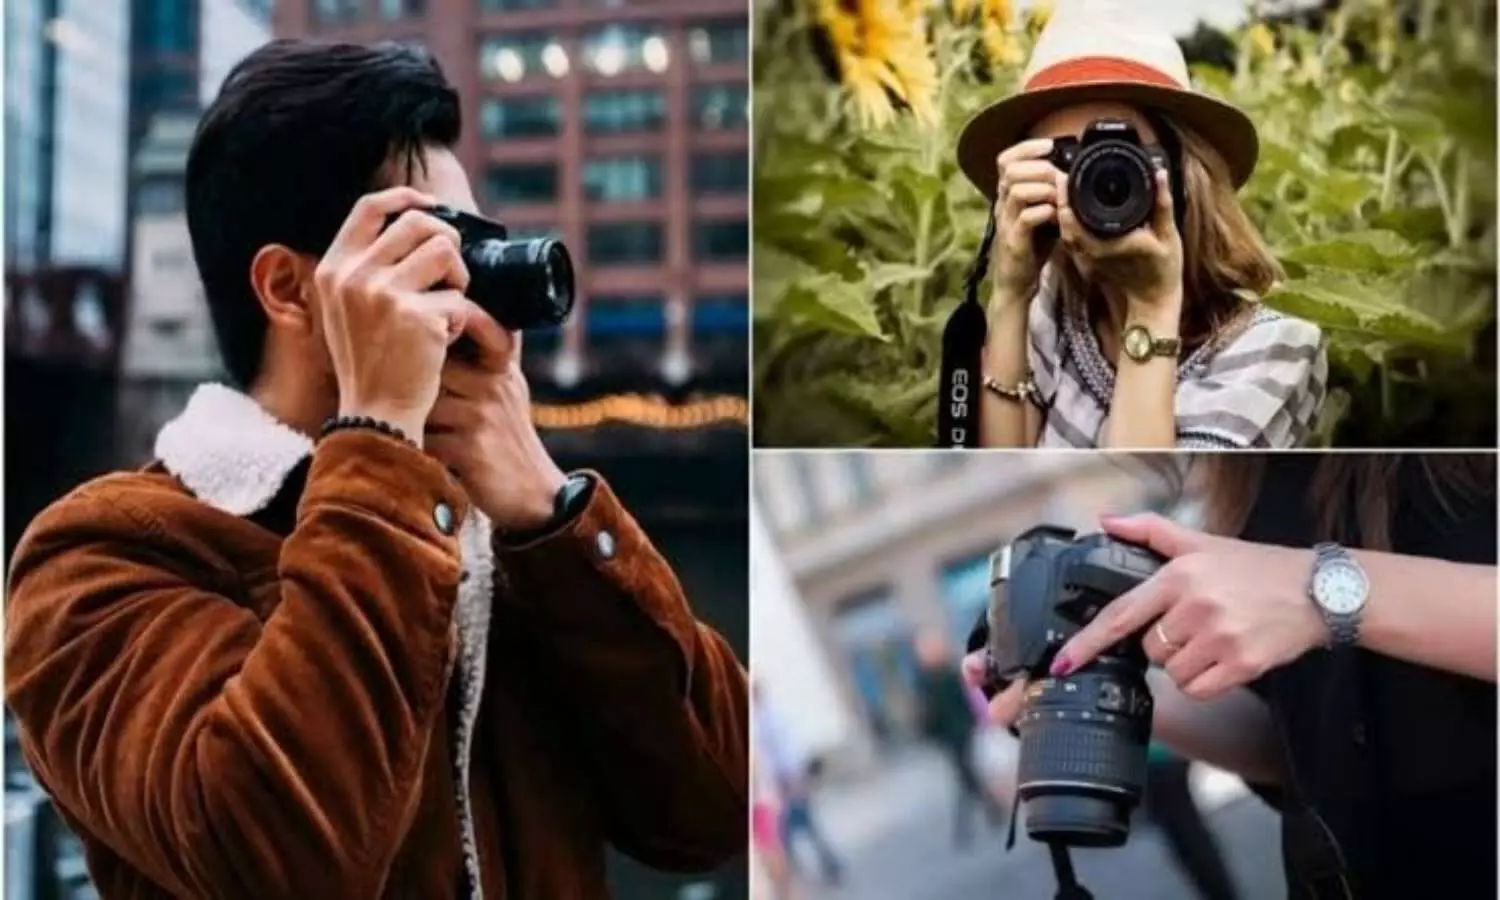 Top 5 Career Options in Photography